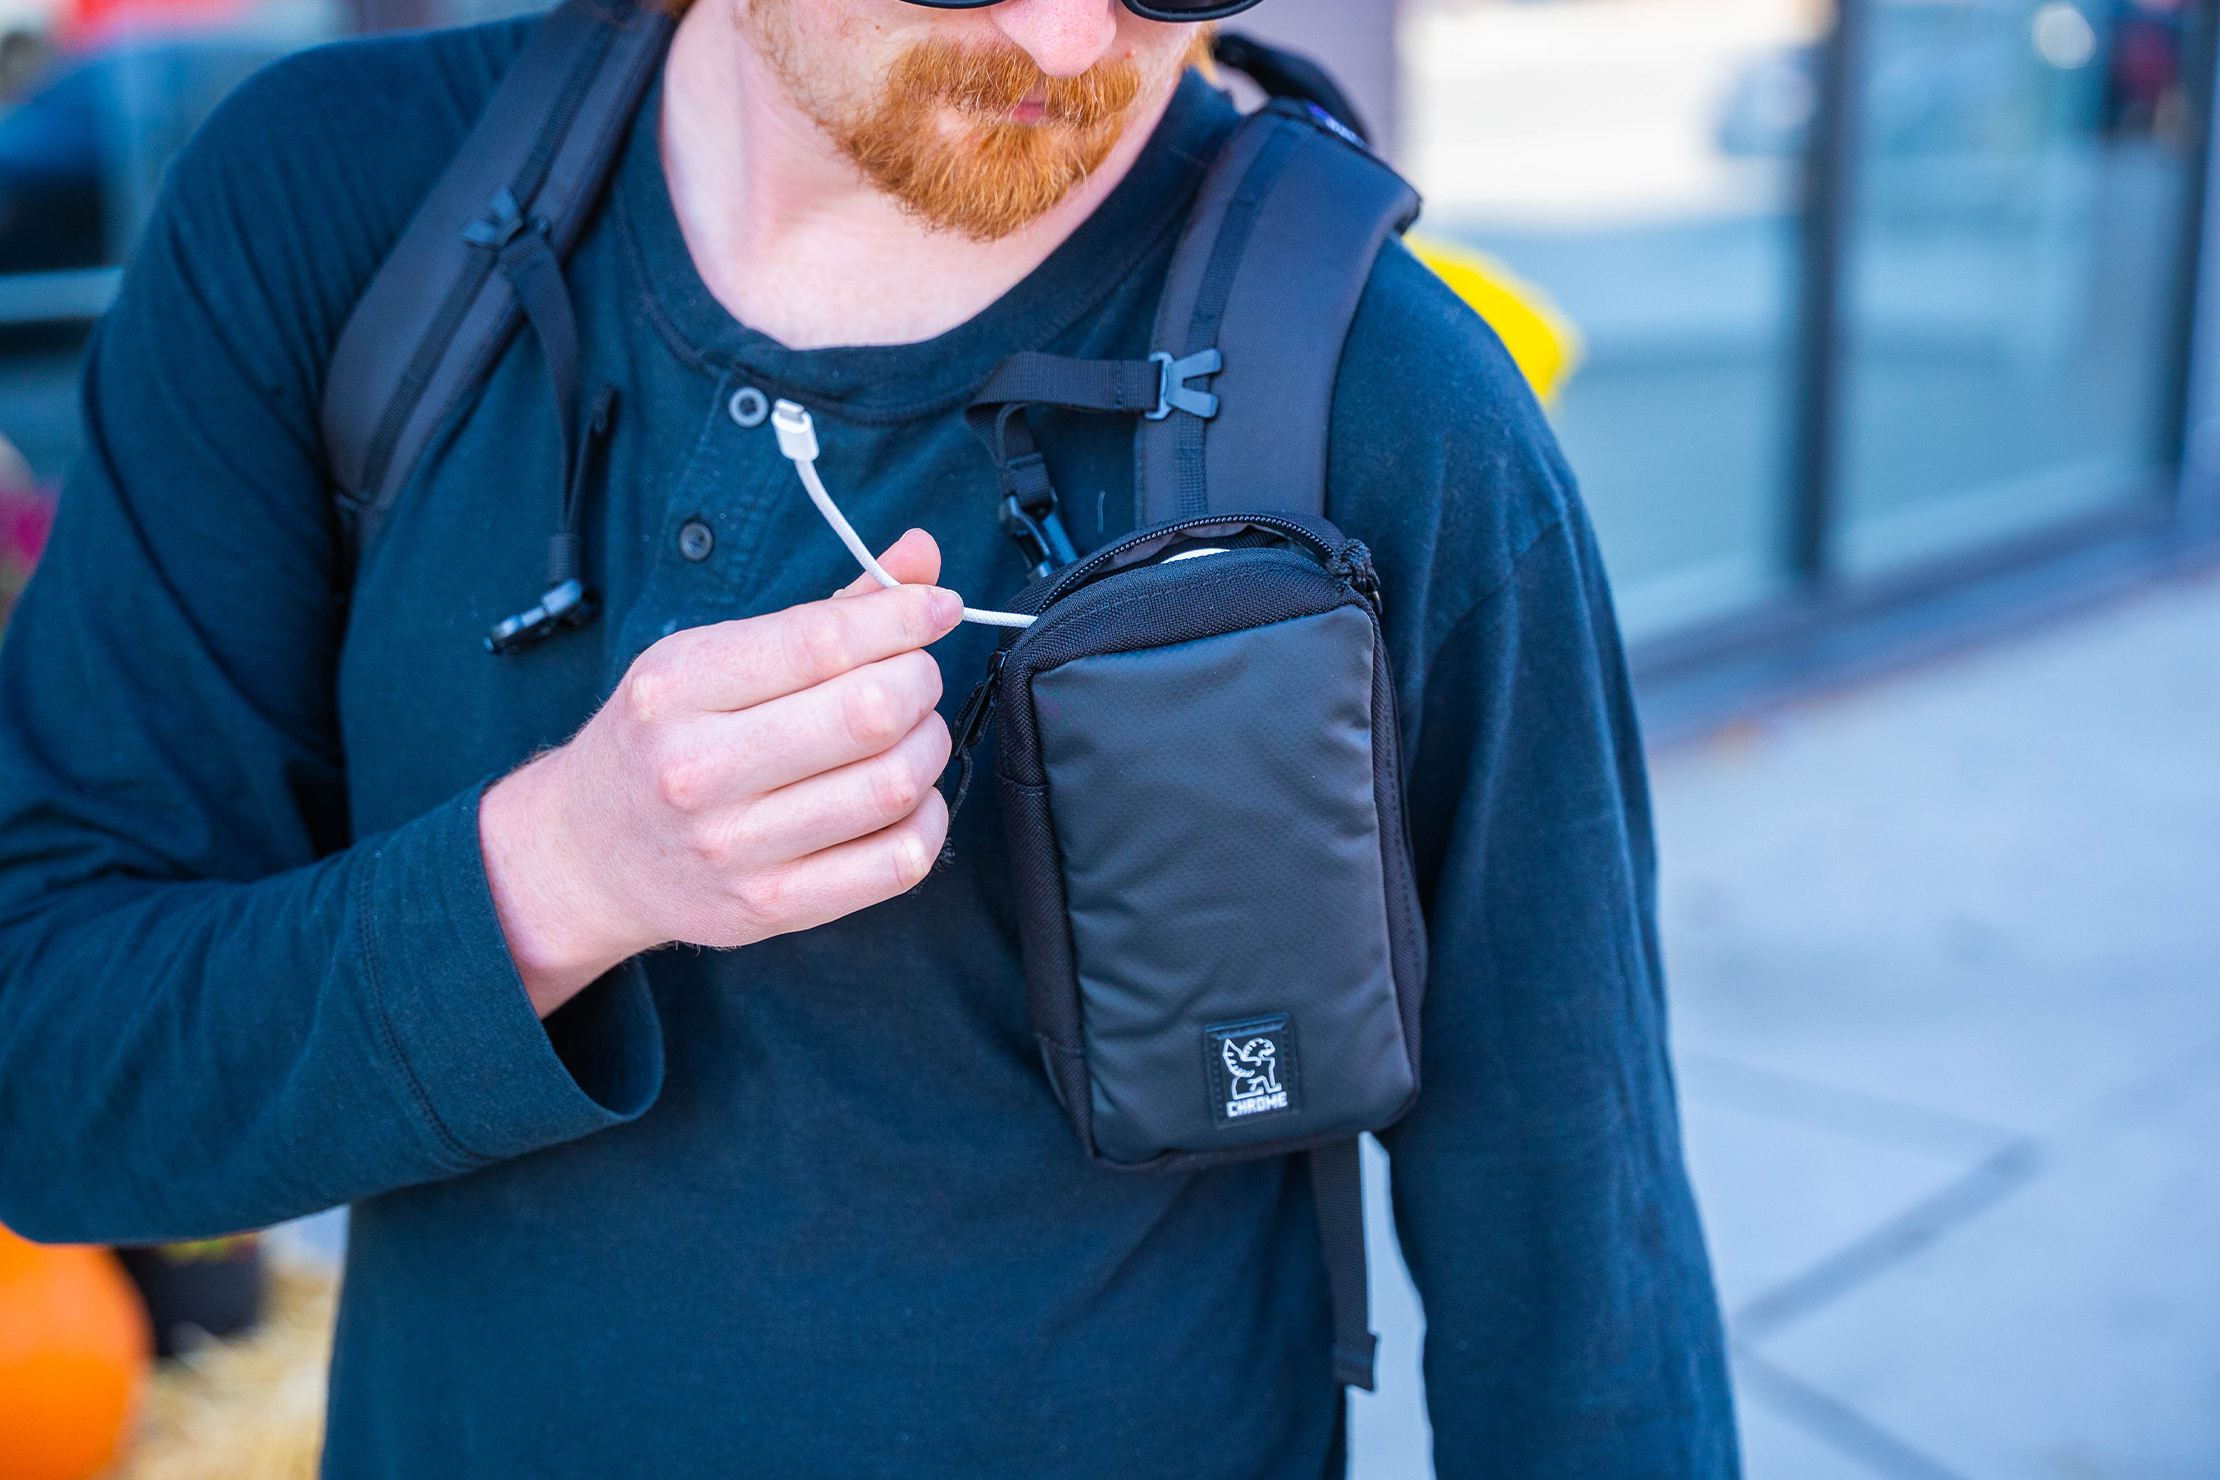 Chrome Industries Tech Accessory Pouch In Use 2